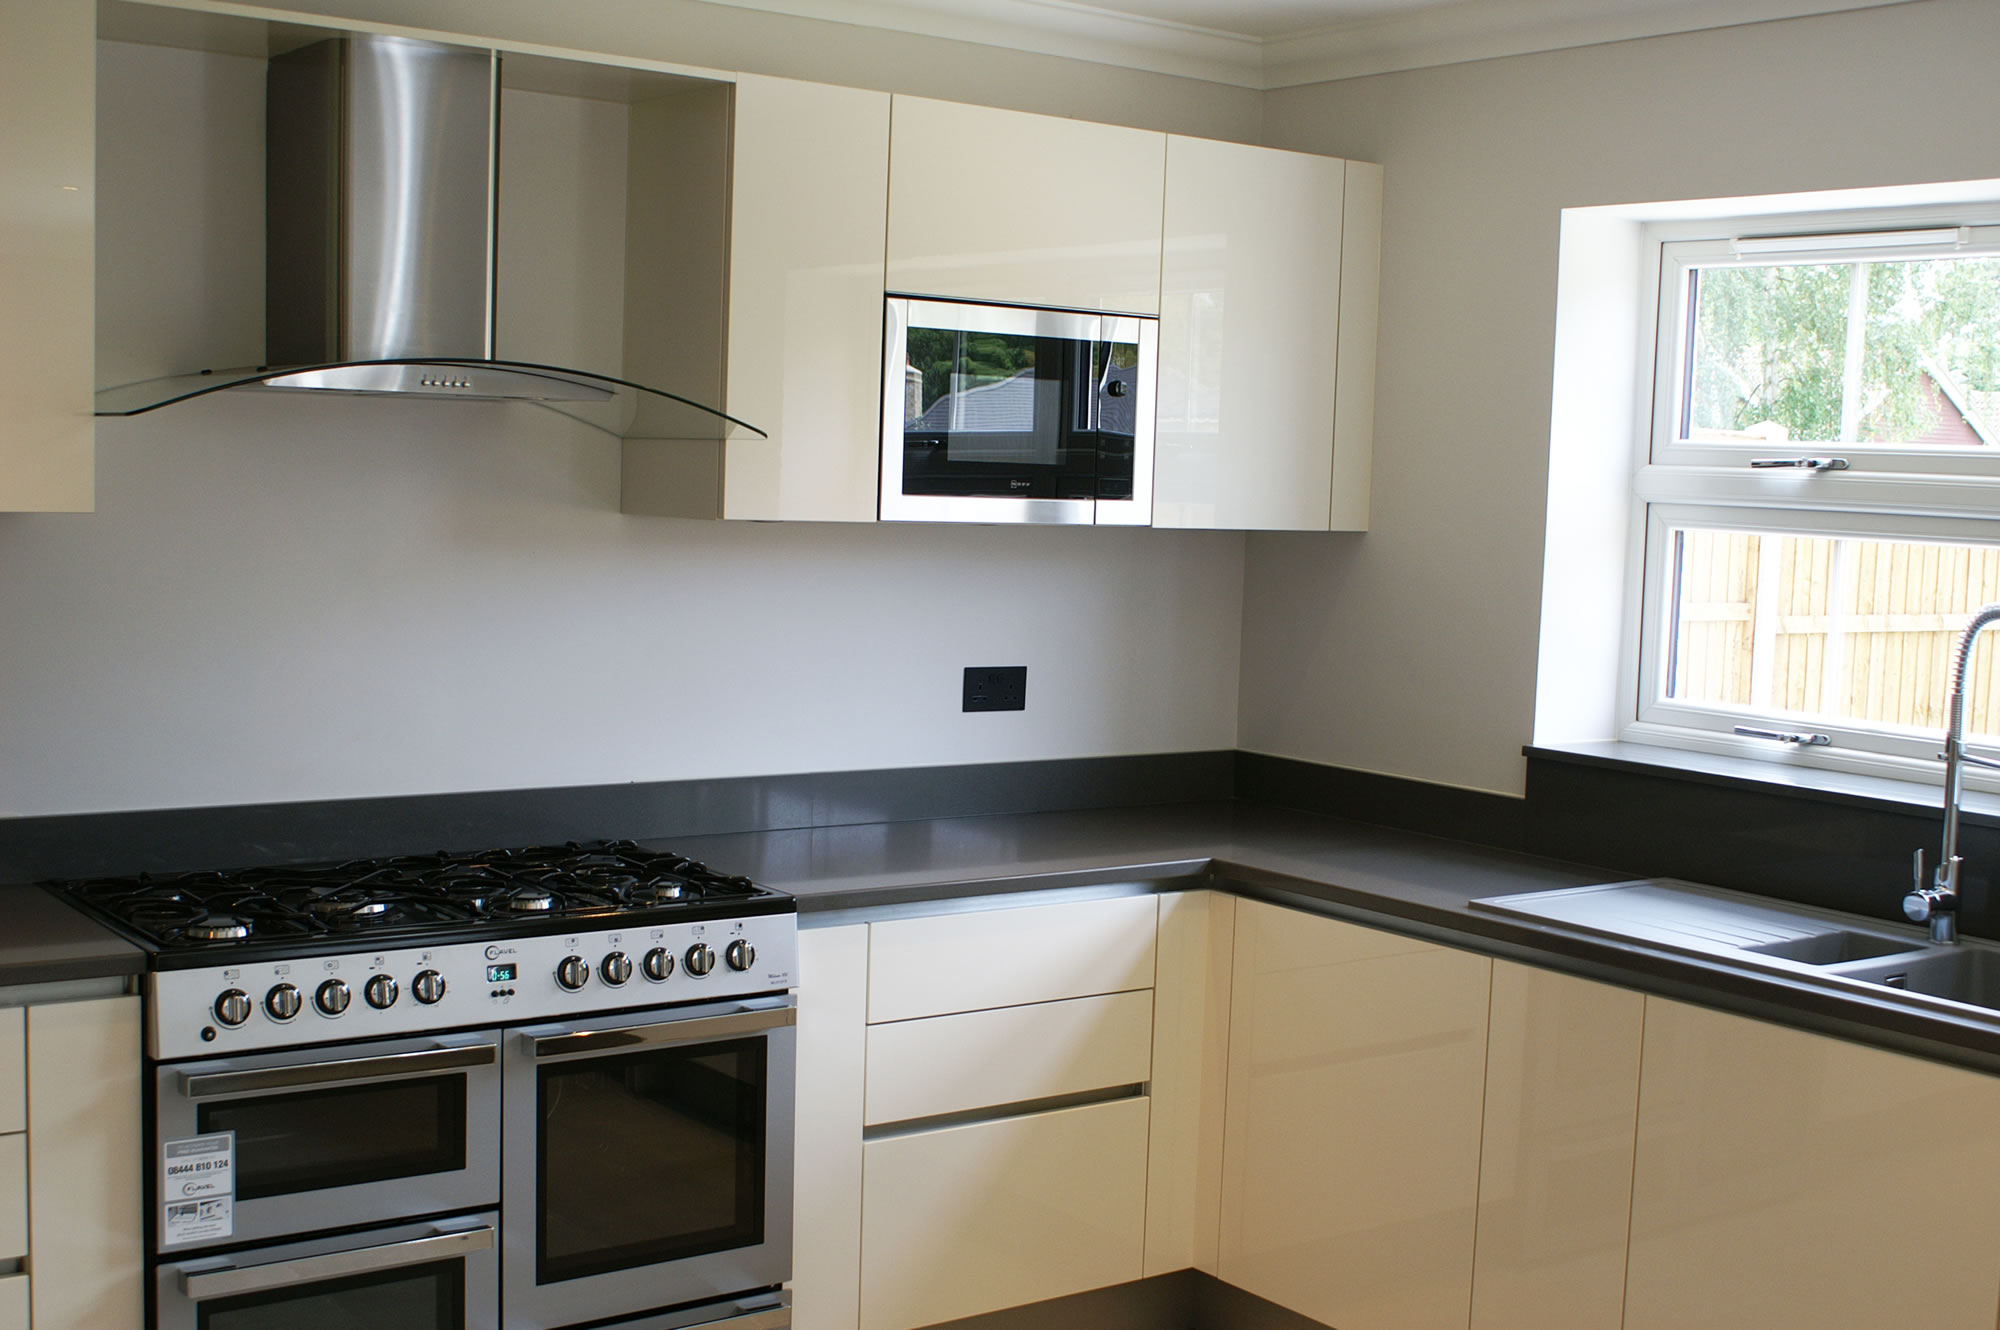 A Clarendon kitchen image with oven and sink.